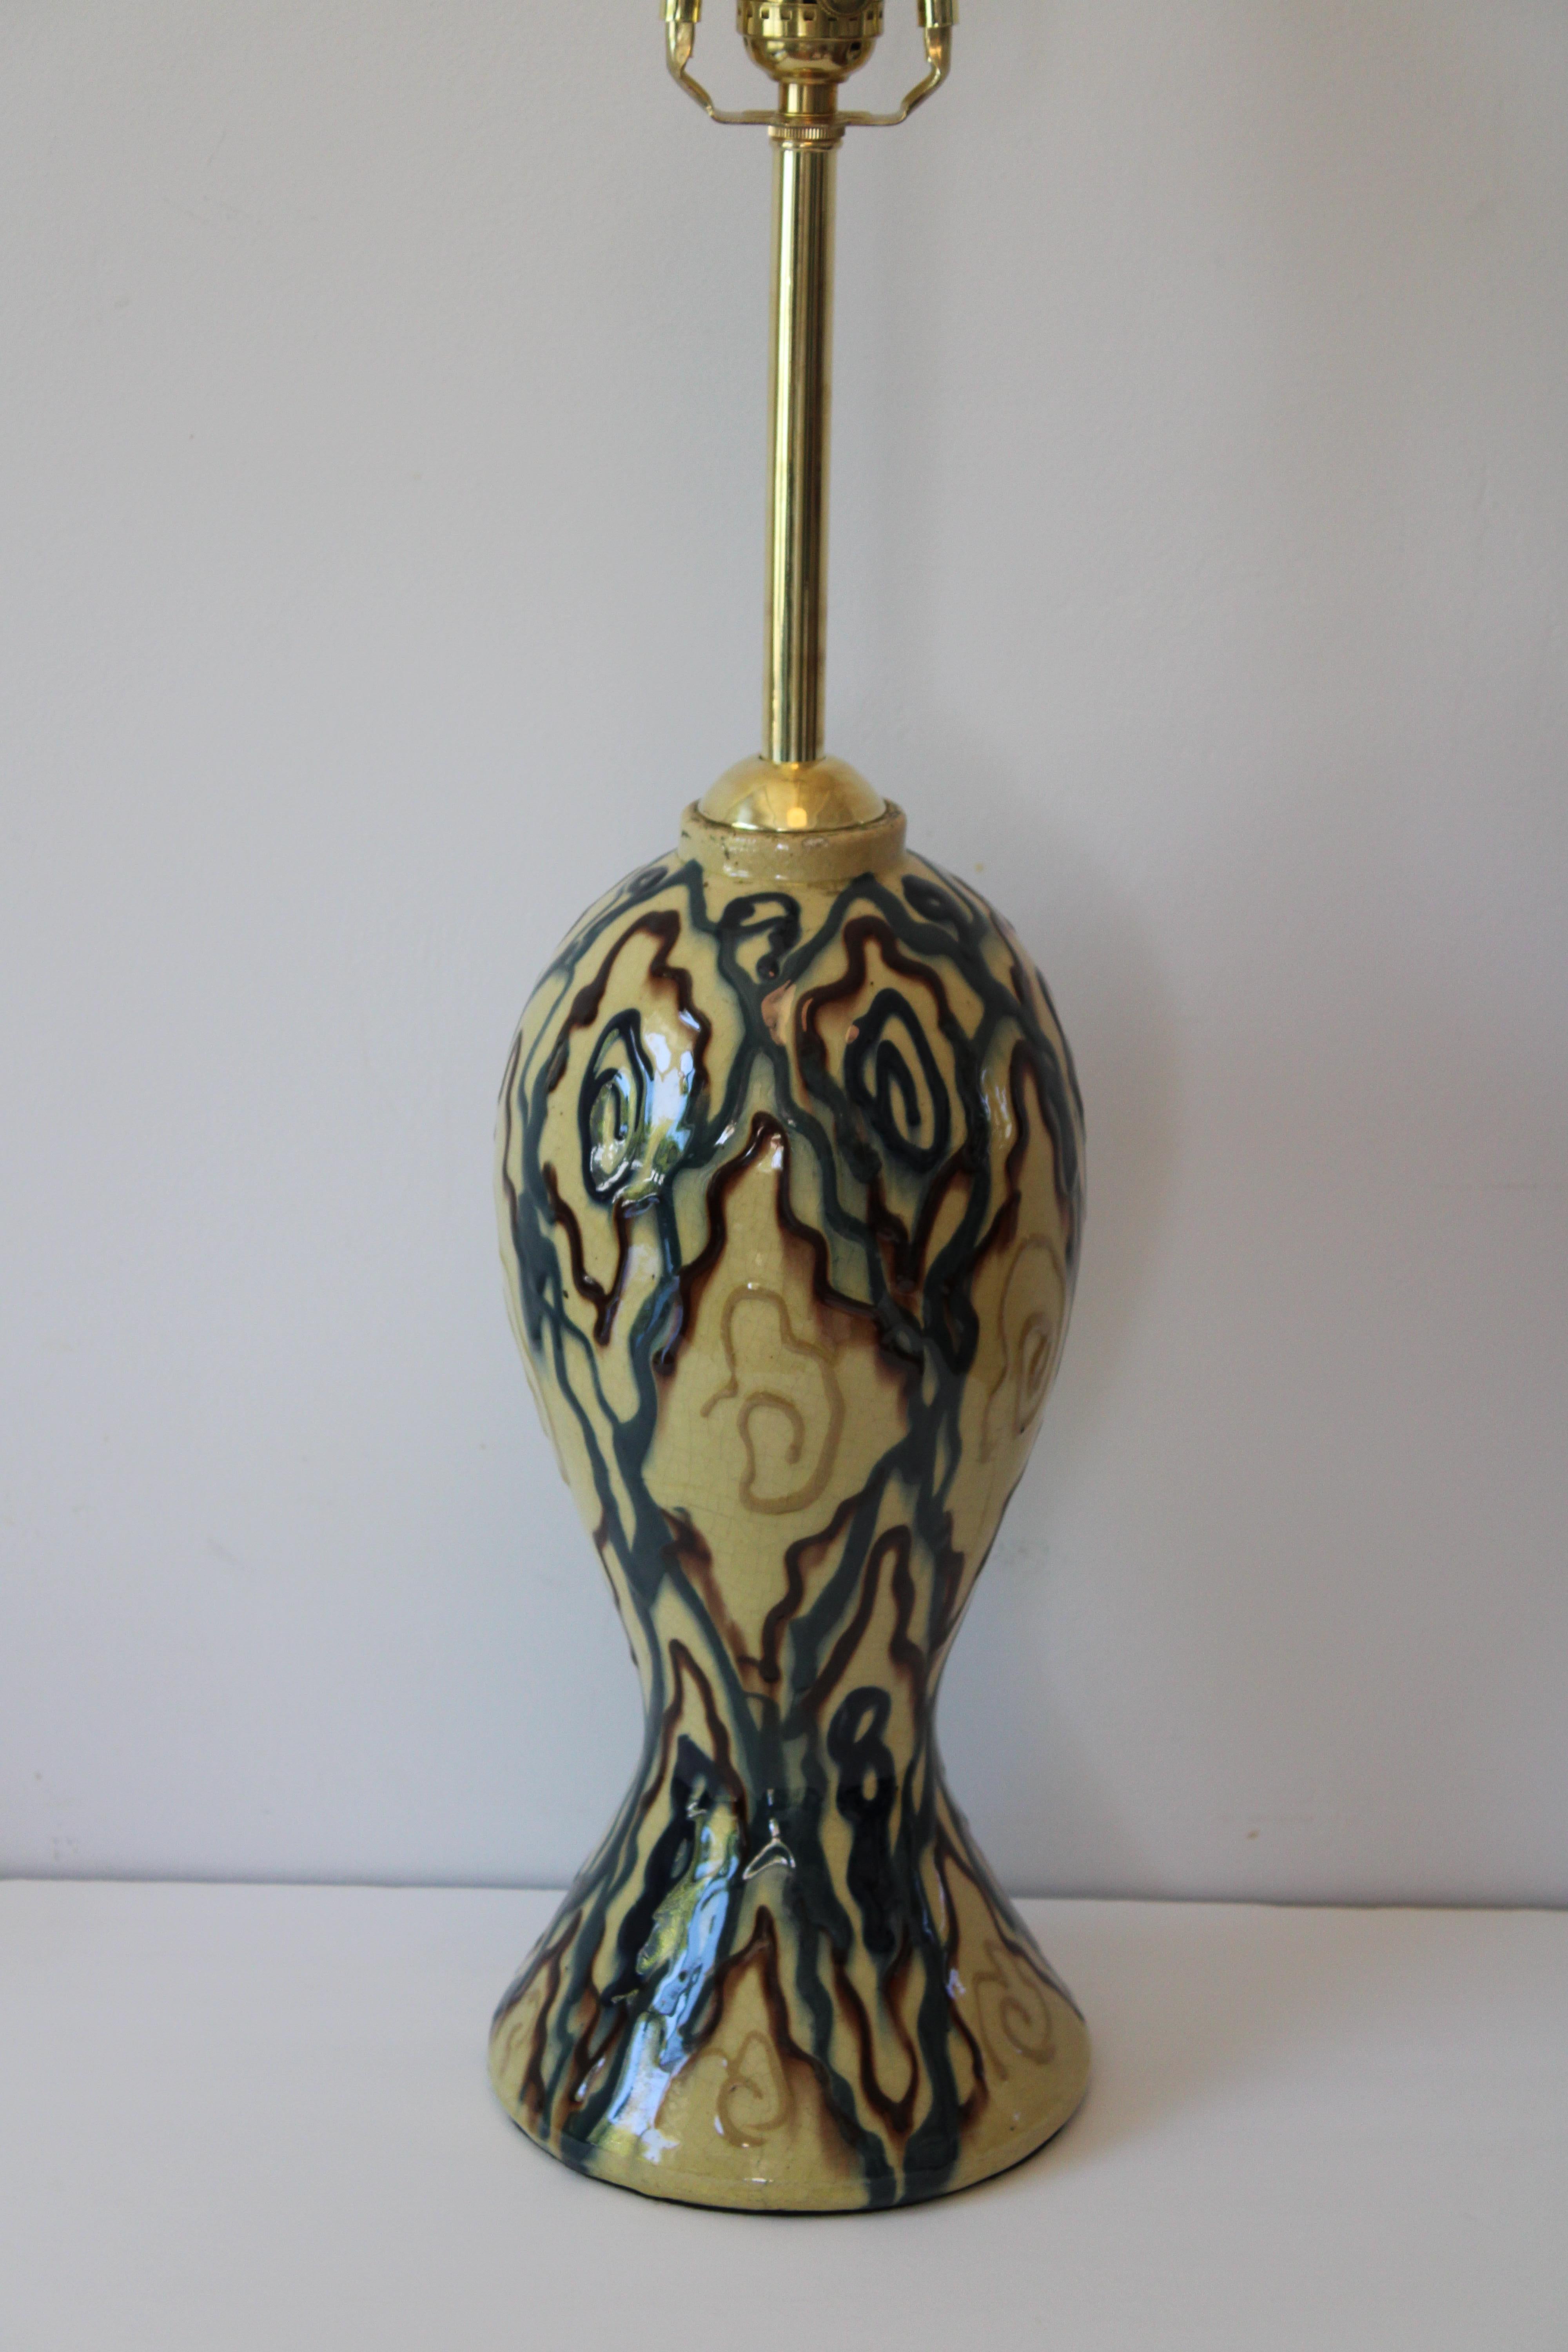 Ceramic abstract table lamp. We were told this lamp came from Belgium. Lamp has been professionally rewired with high quality brass hardware. We also polished the brass rod which is original.  Lamp measures 21